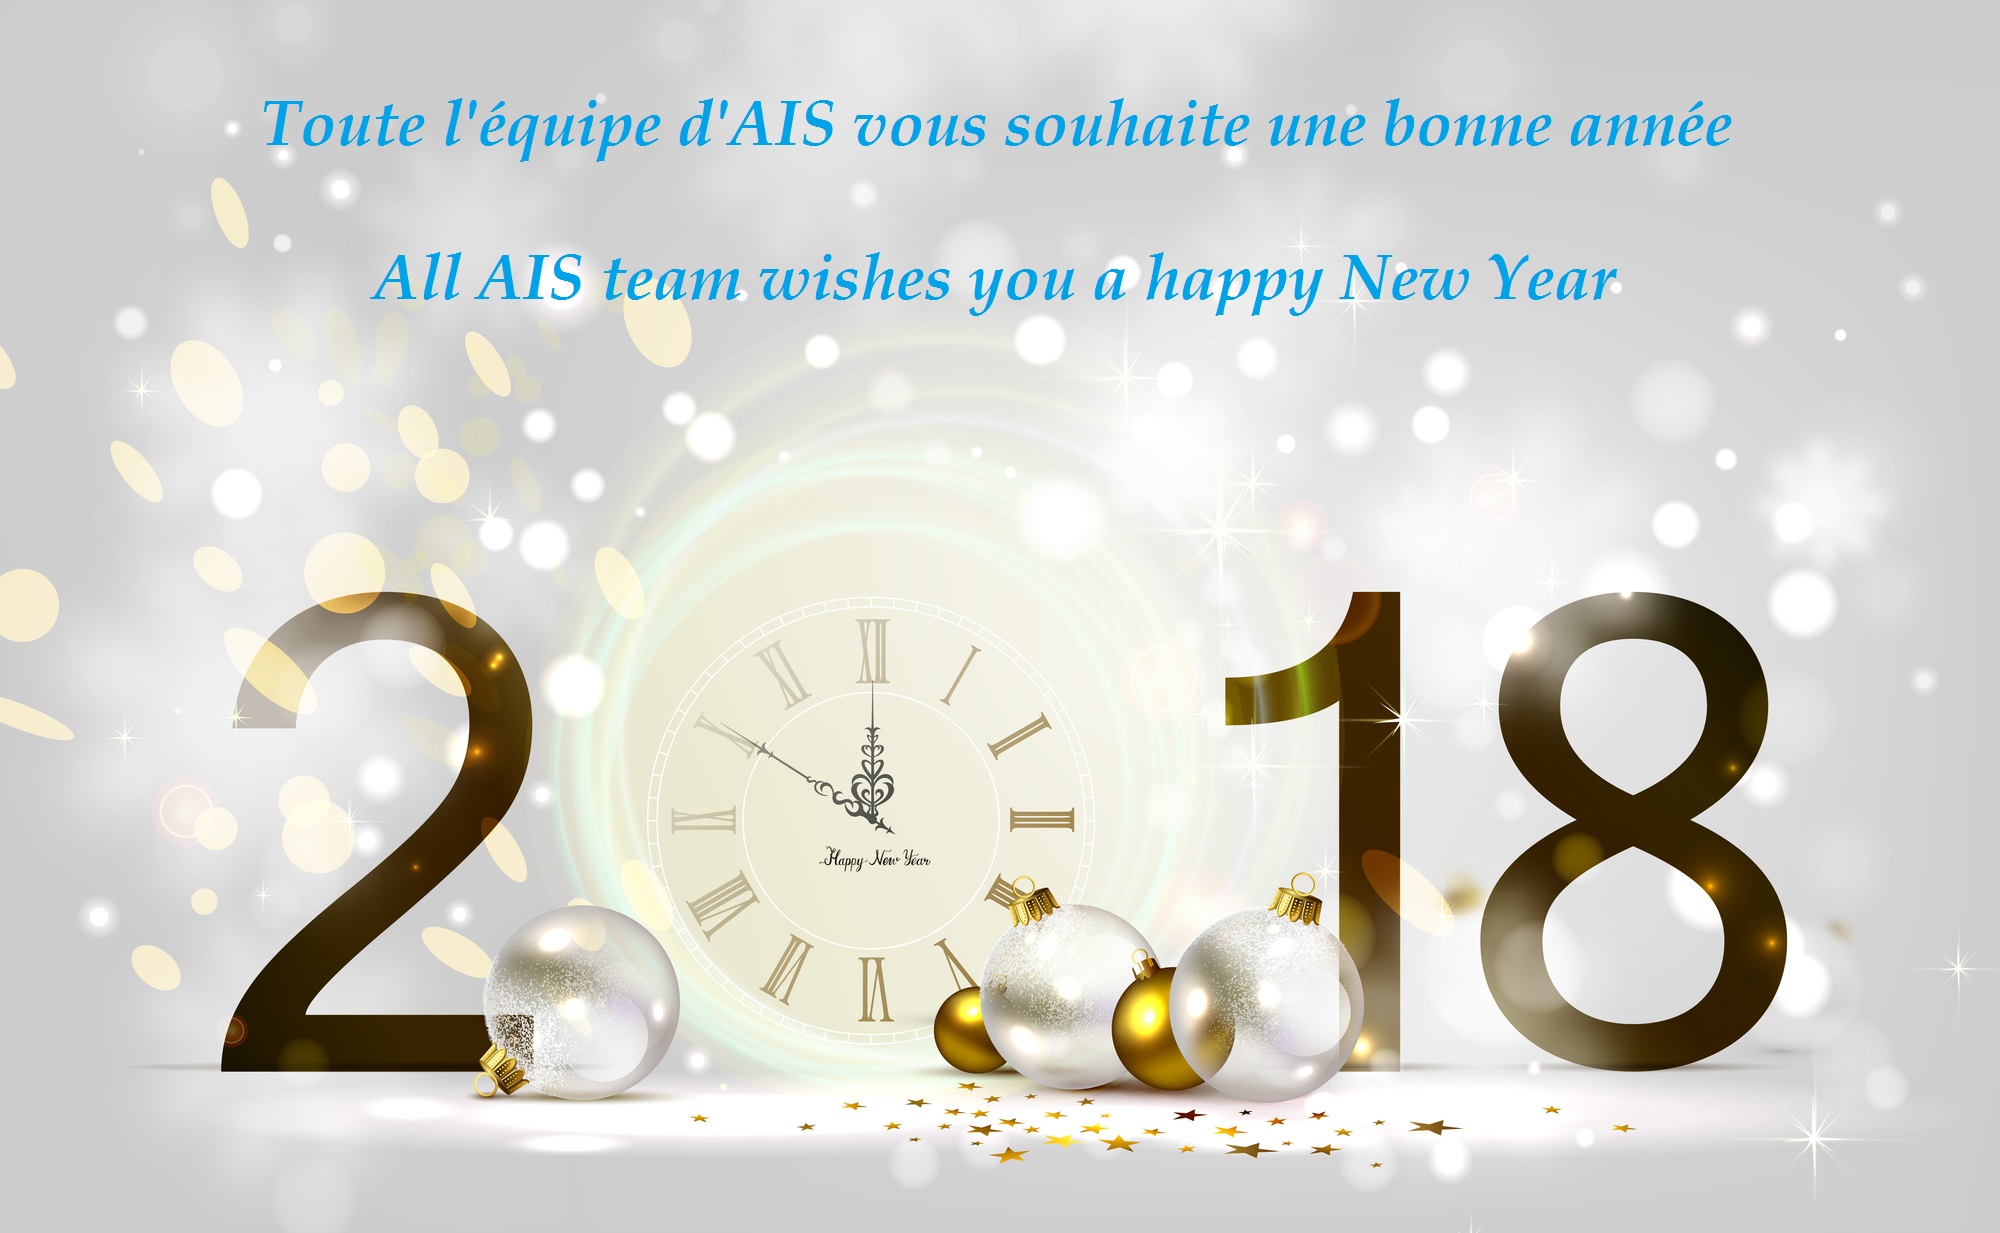 AIS wishes a happy New Year 2018 to all customers & partners